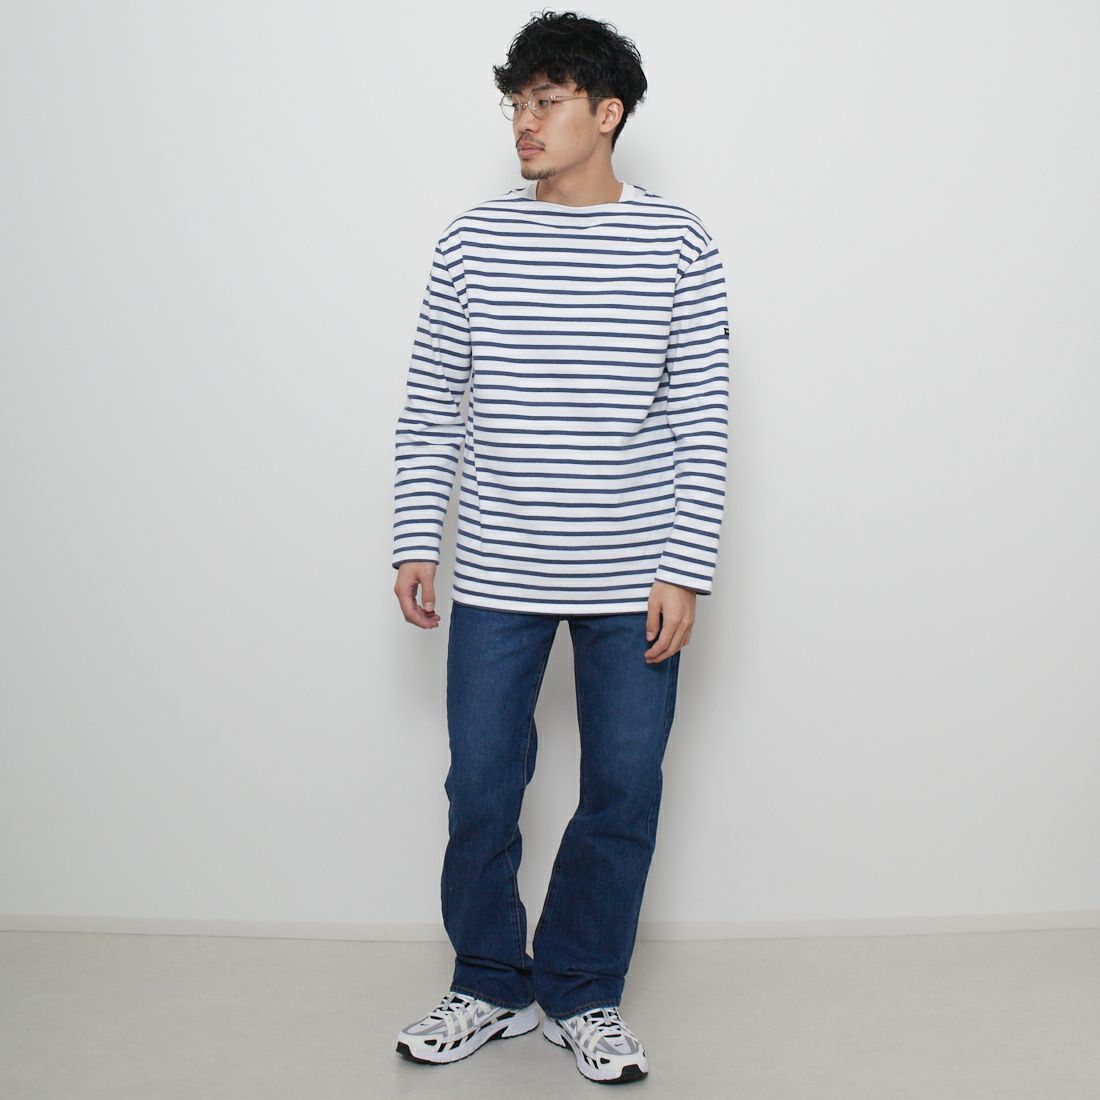 ST.JAMES [セントジェームス] 別注 バスクボーダーロングスリーブTシャツ [OUESSANT-JF] NEI/IND&&モデル身長：168cm 着用サイズ：5&&